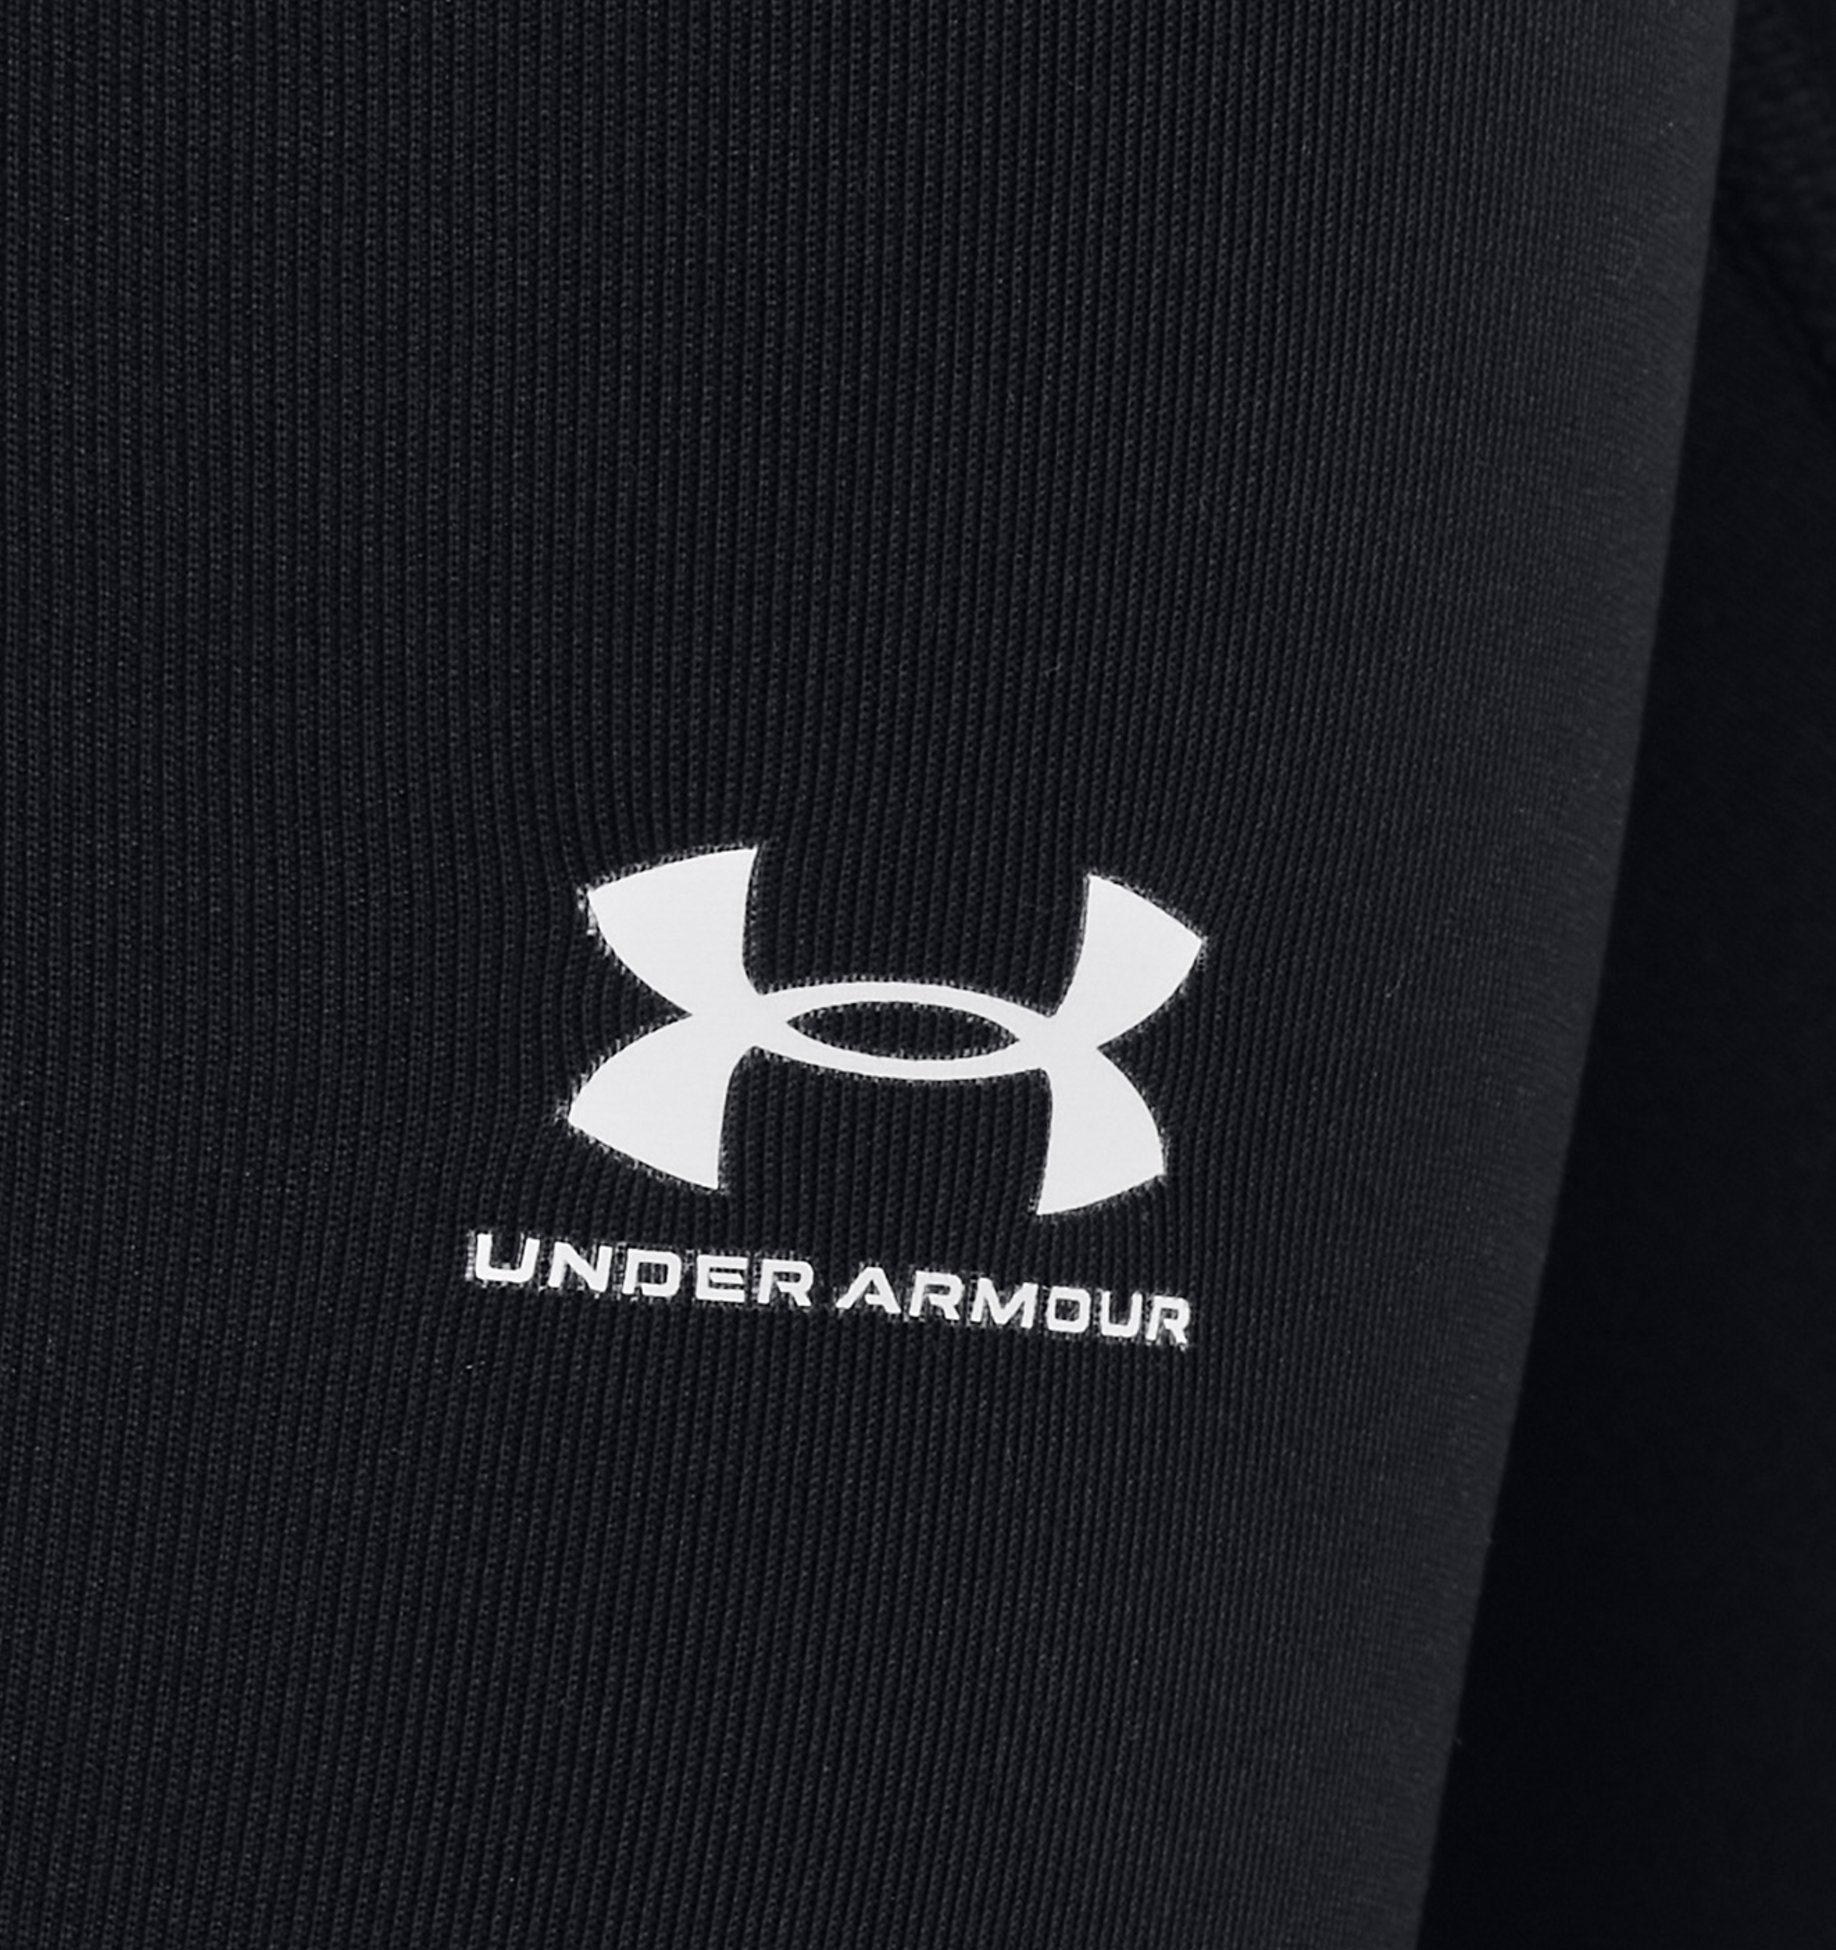 https://underarmour.scene7.com/is/image/Underarmour/V5-1368700-001_SIDEDET?rp=standard-0pad|pdpZoomDesktop&scl=0.72&fmt=jpg&qlt=85&resMode=sharp2&cache=on,on&bgc=f0f0f0&wid=1836&hei=1950&size=1500,1500